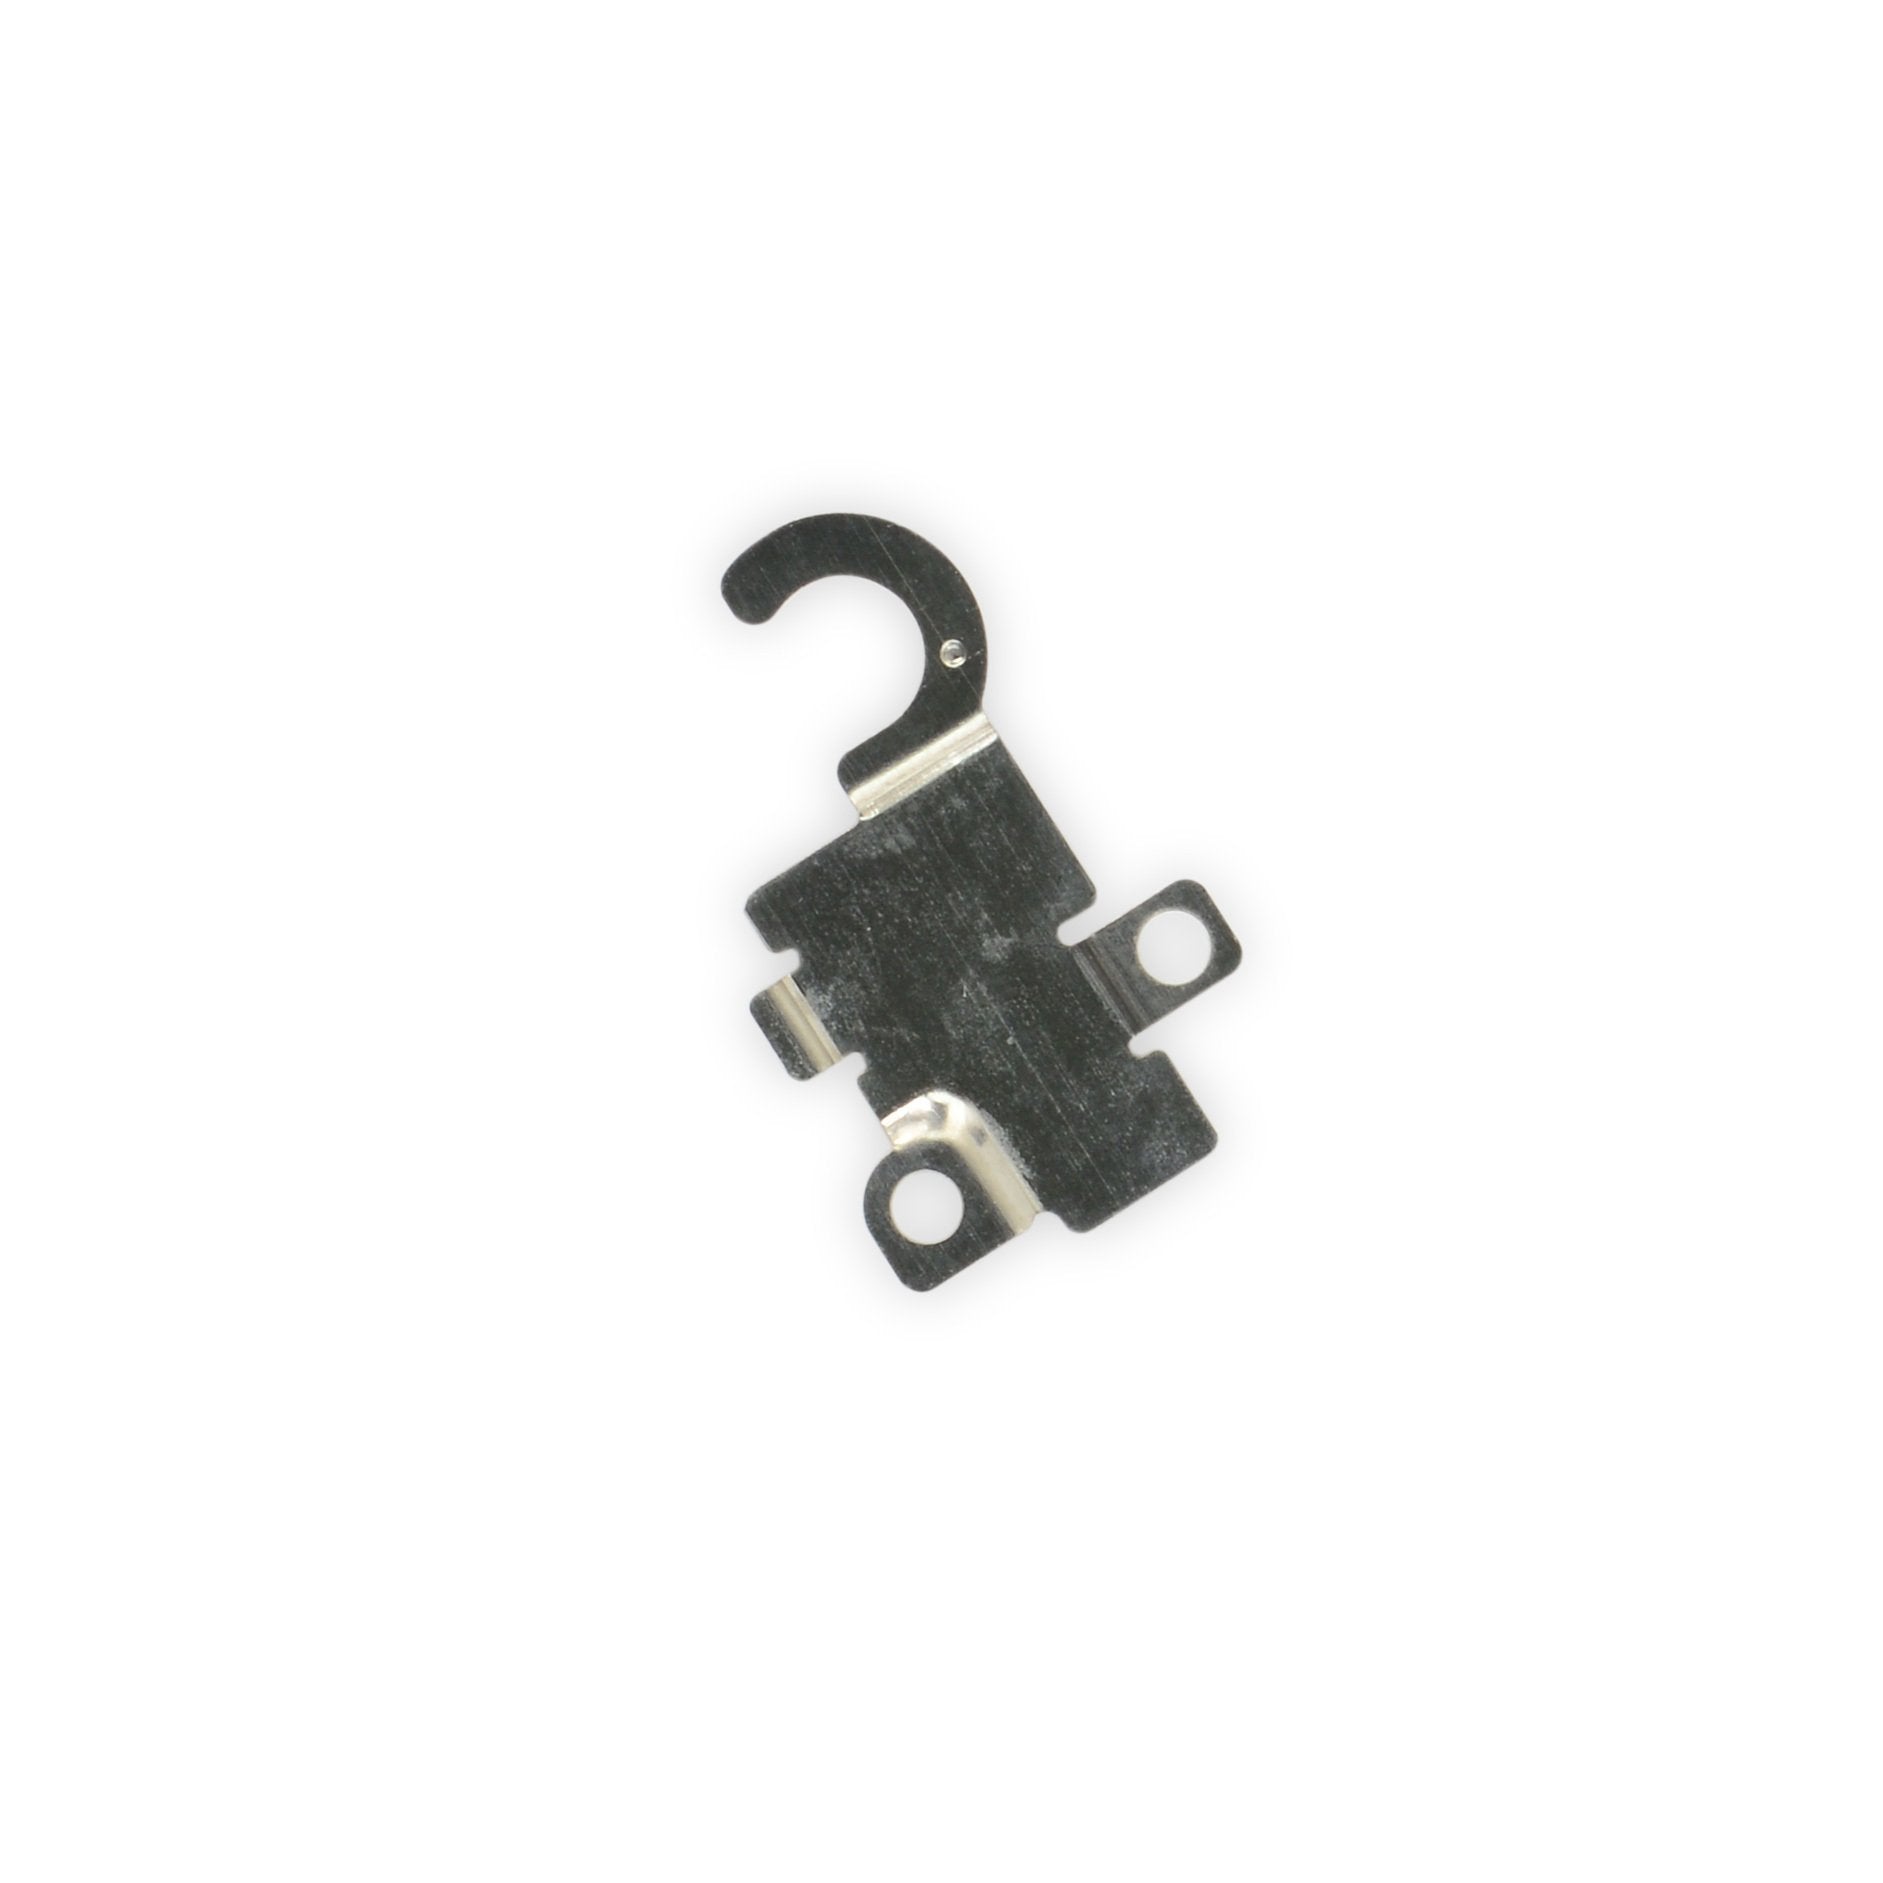 iPhone 6s Plus Flash and Microphone Bracket